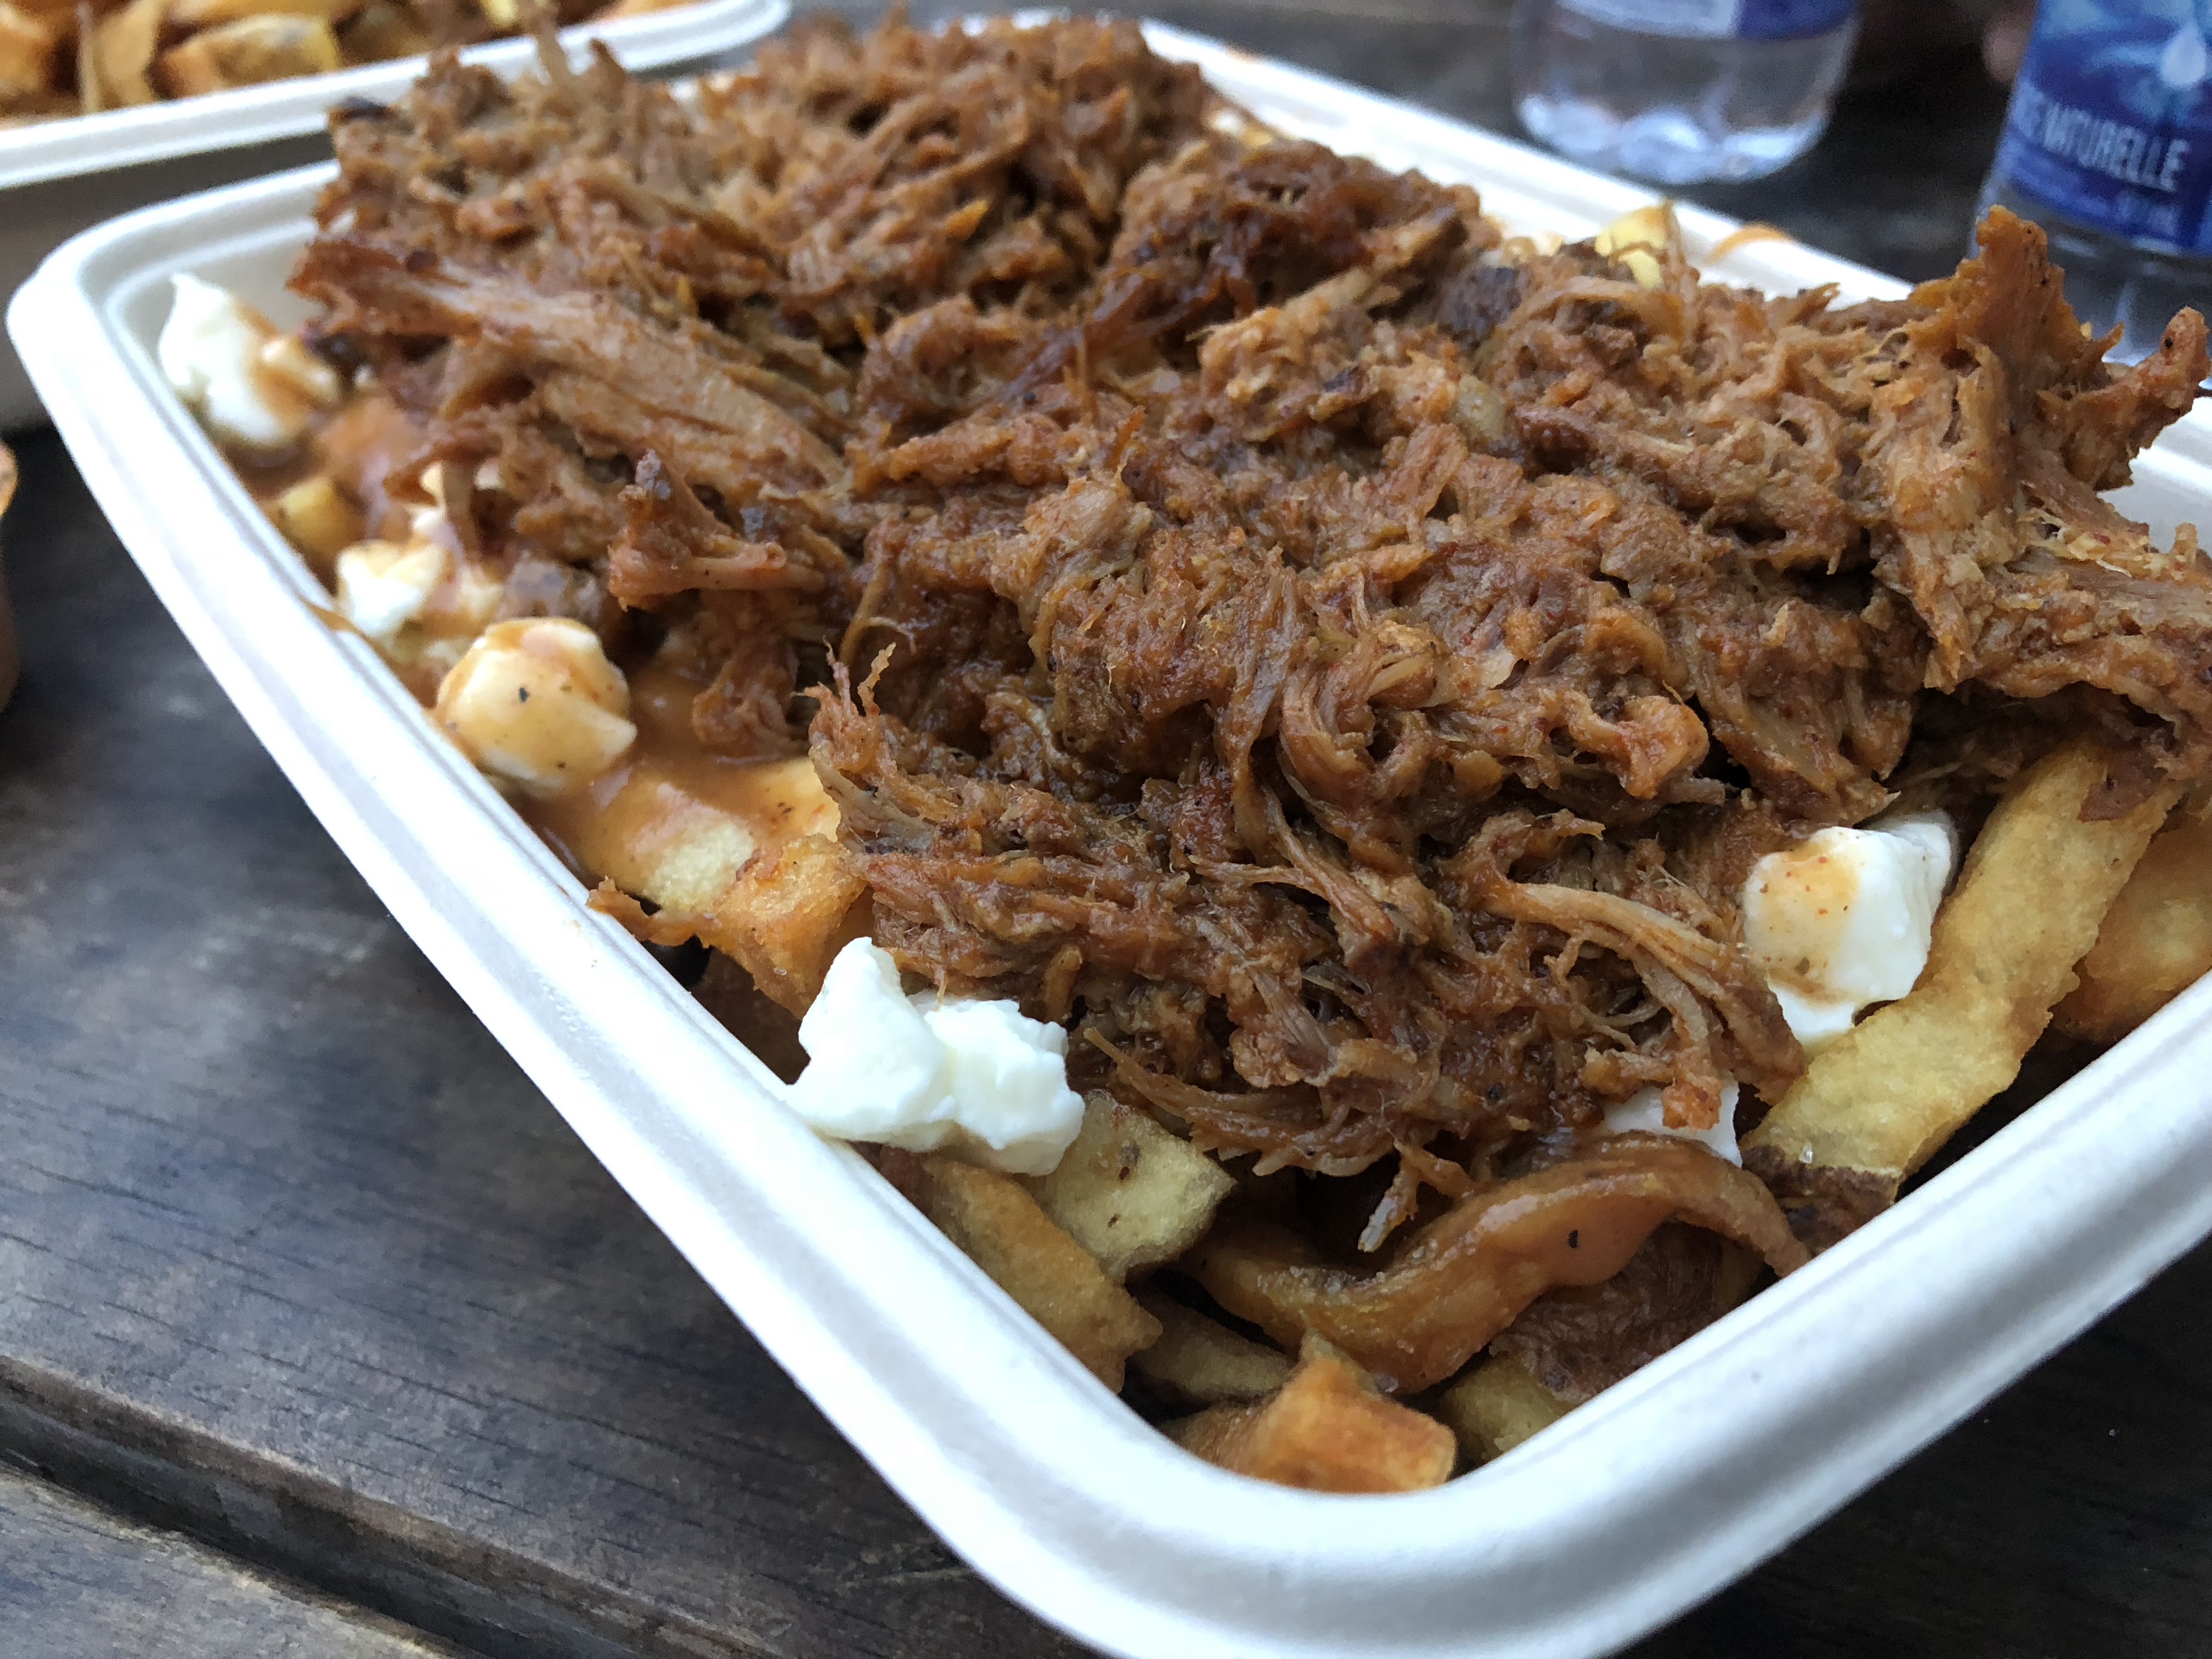 golden french fries topped with brown gravy and white cheese curds, which is all topped with juicy, barbecue pulled pork